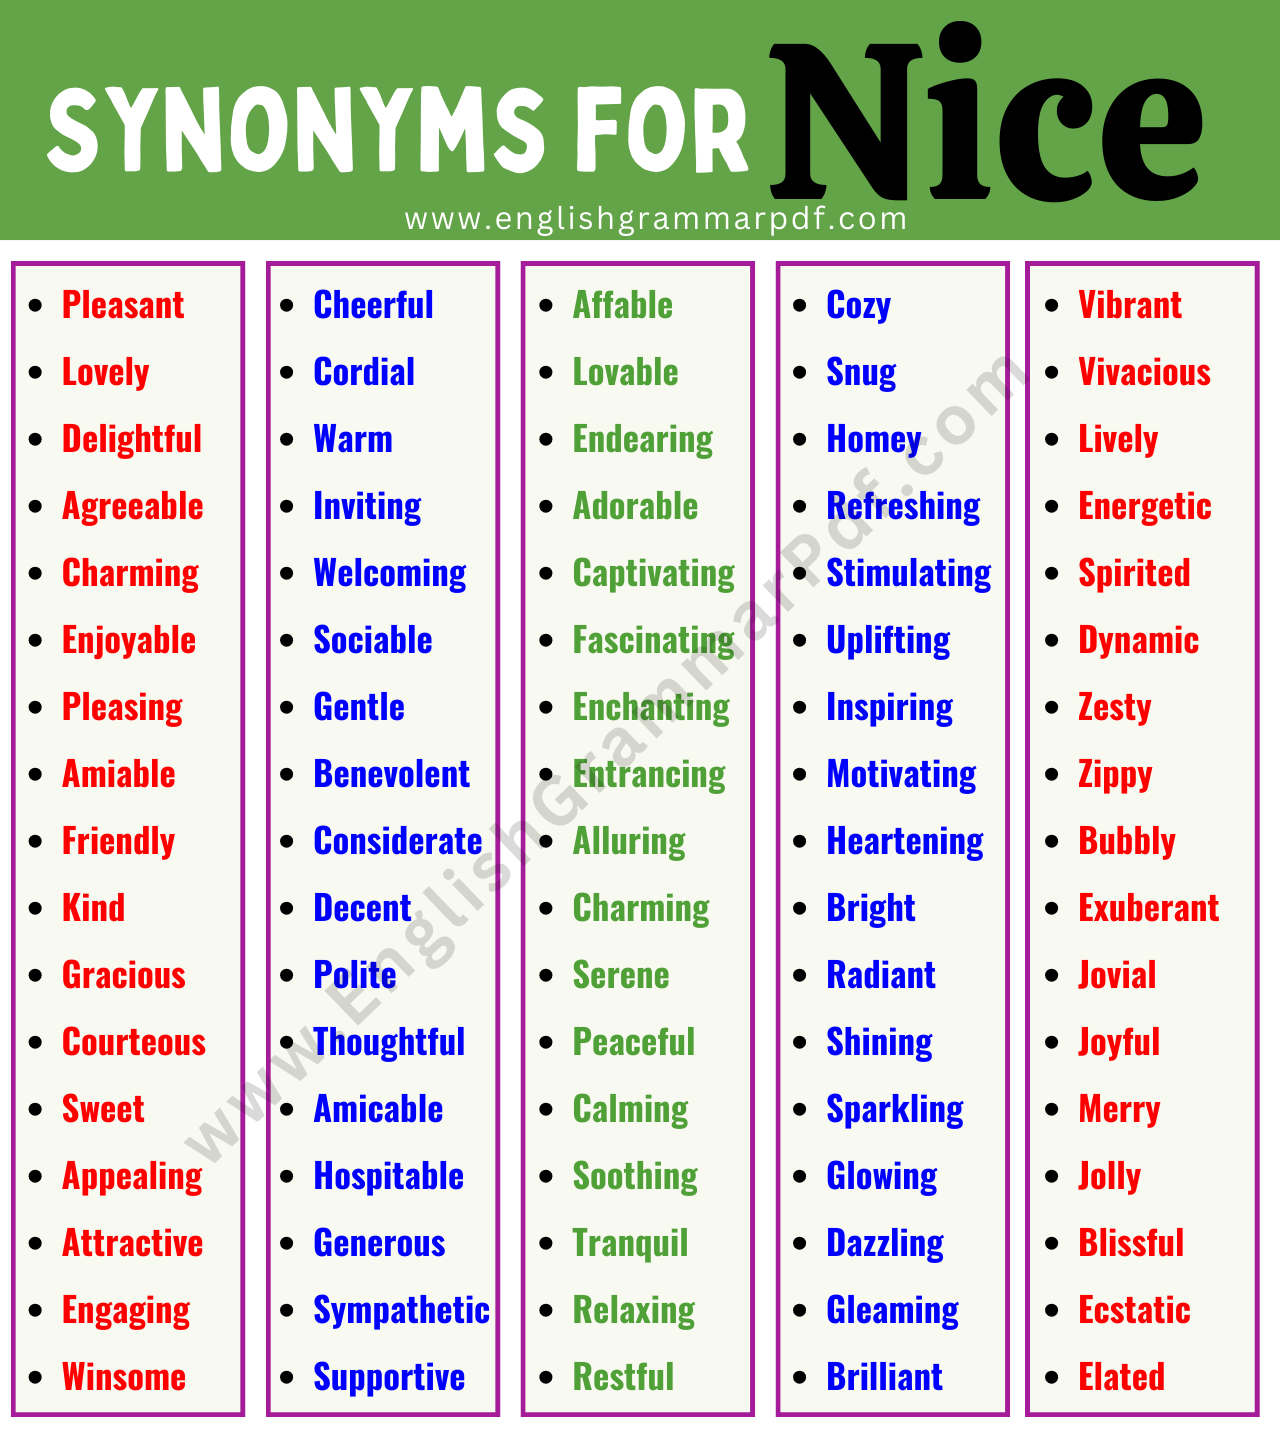 Synonyms of NICE